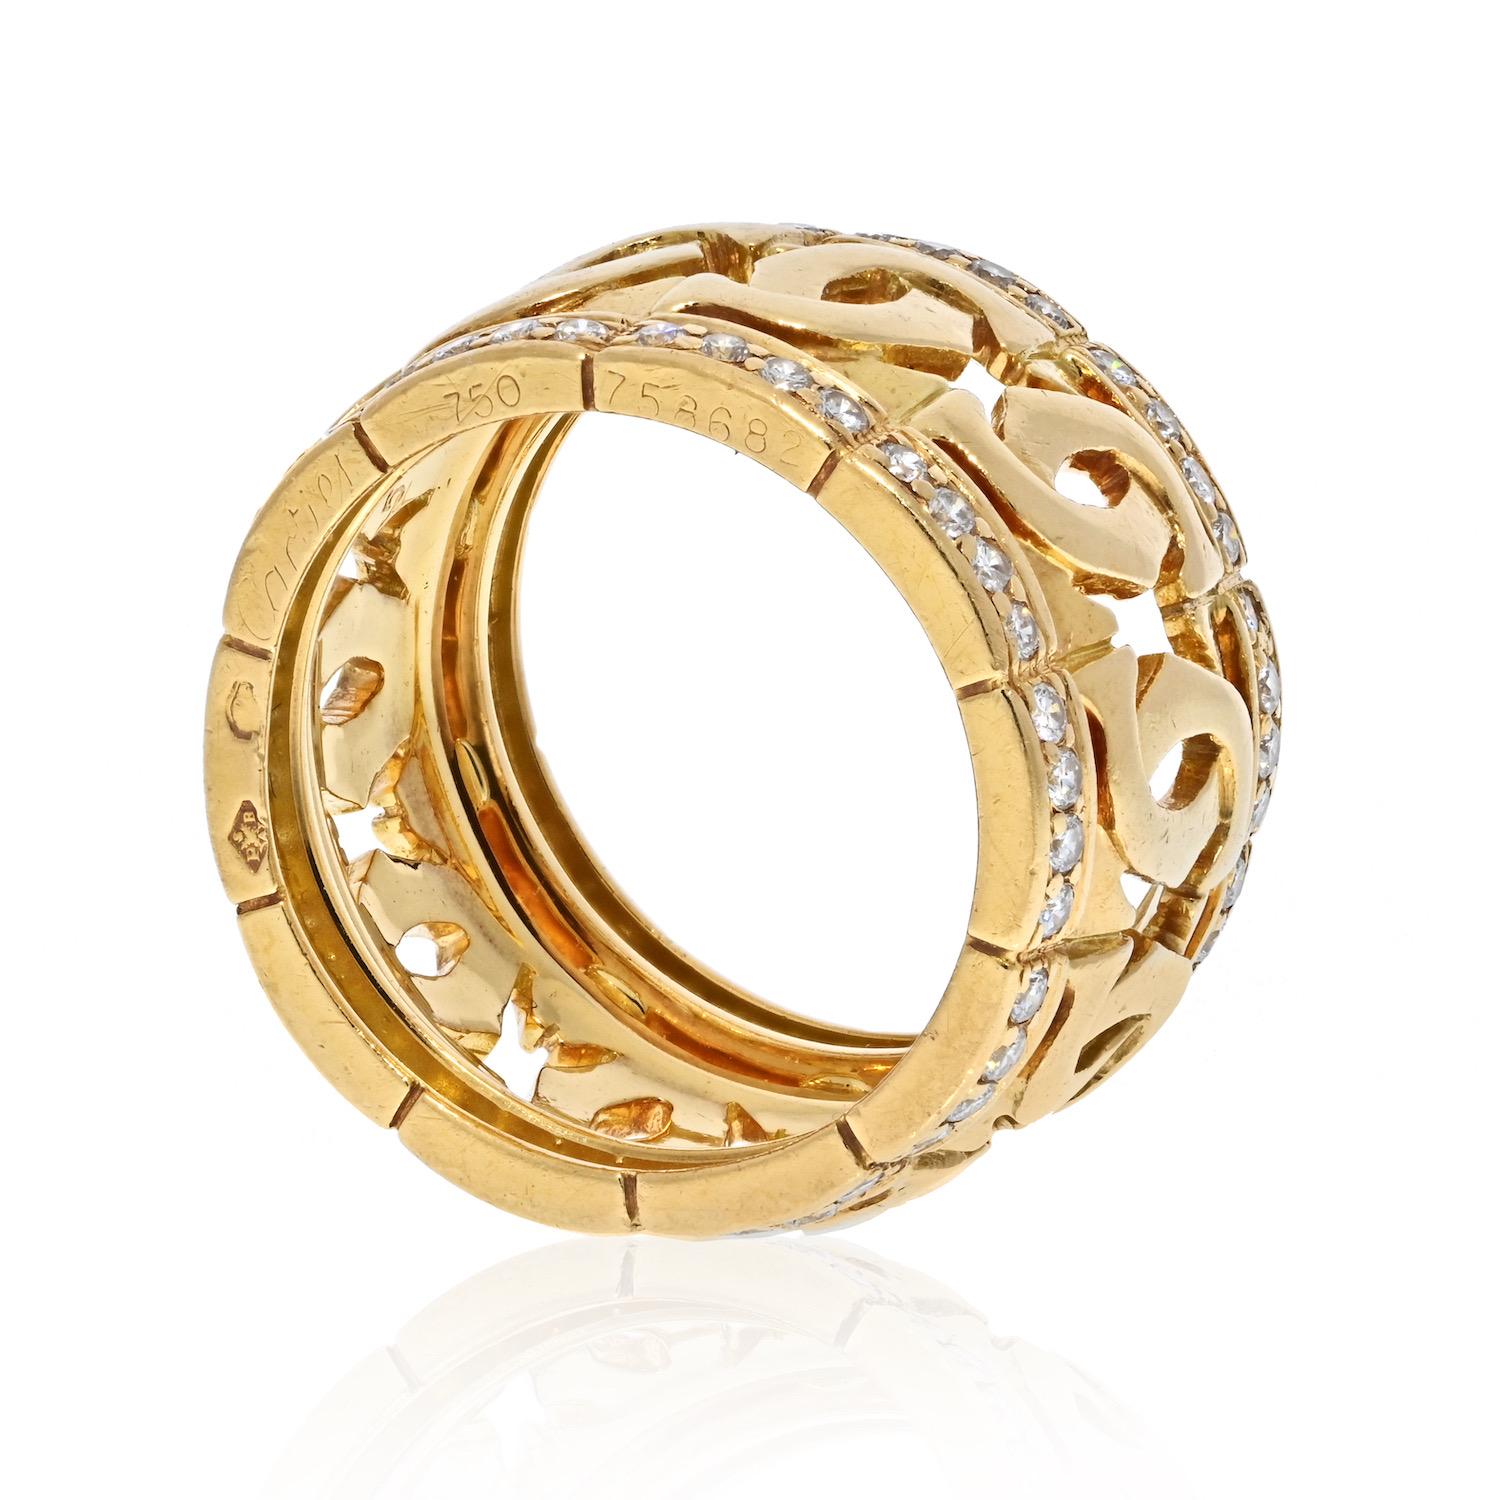 Beautiful ring by Cartier crafted in 18K gold; set with round brilliant-cut diamonds; width measures 1/2 inch; ring size 6-1/2; weight 11.55 g.
